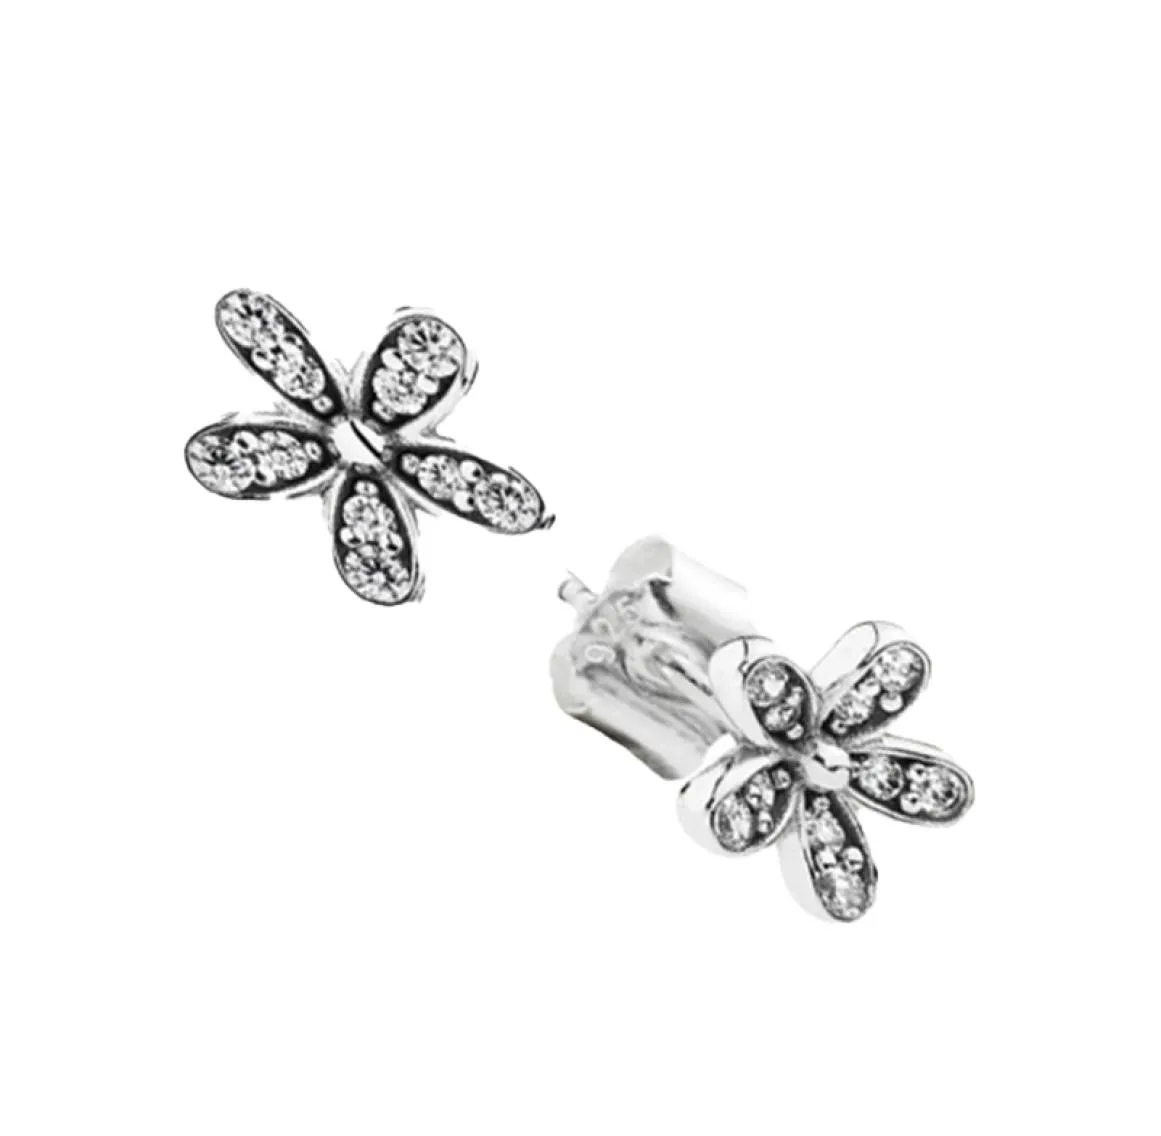 Authentic 925 Silver Daisy Small Earrings for CZ Diamond Wedding Jewelry Cute Girls Earring with Gift box Set5701931